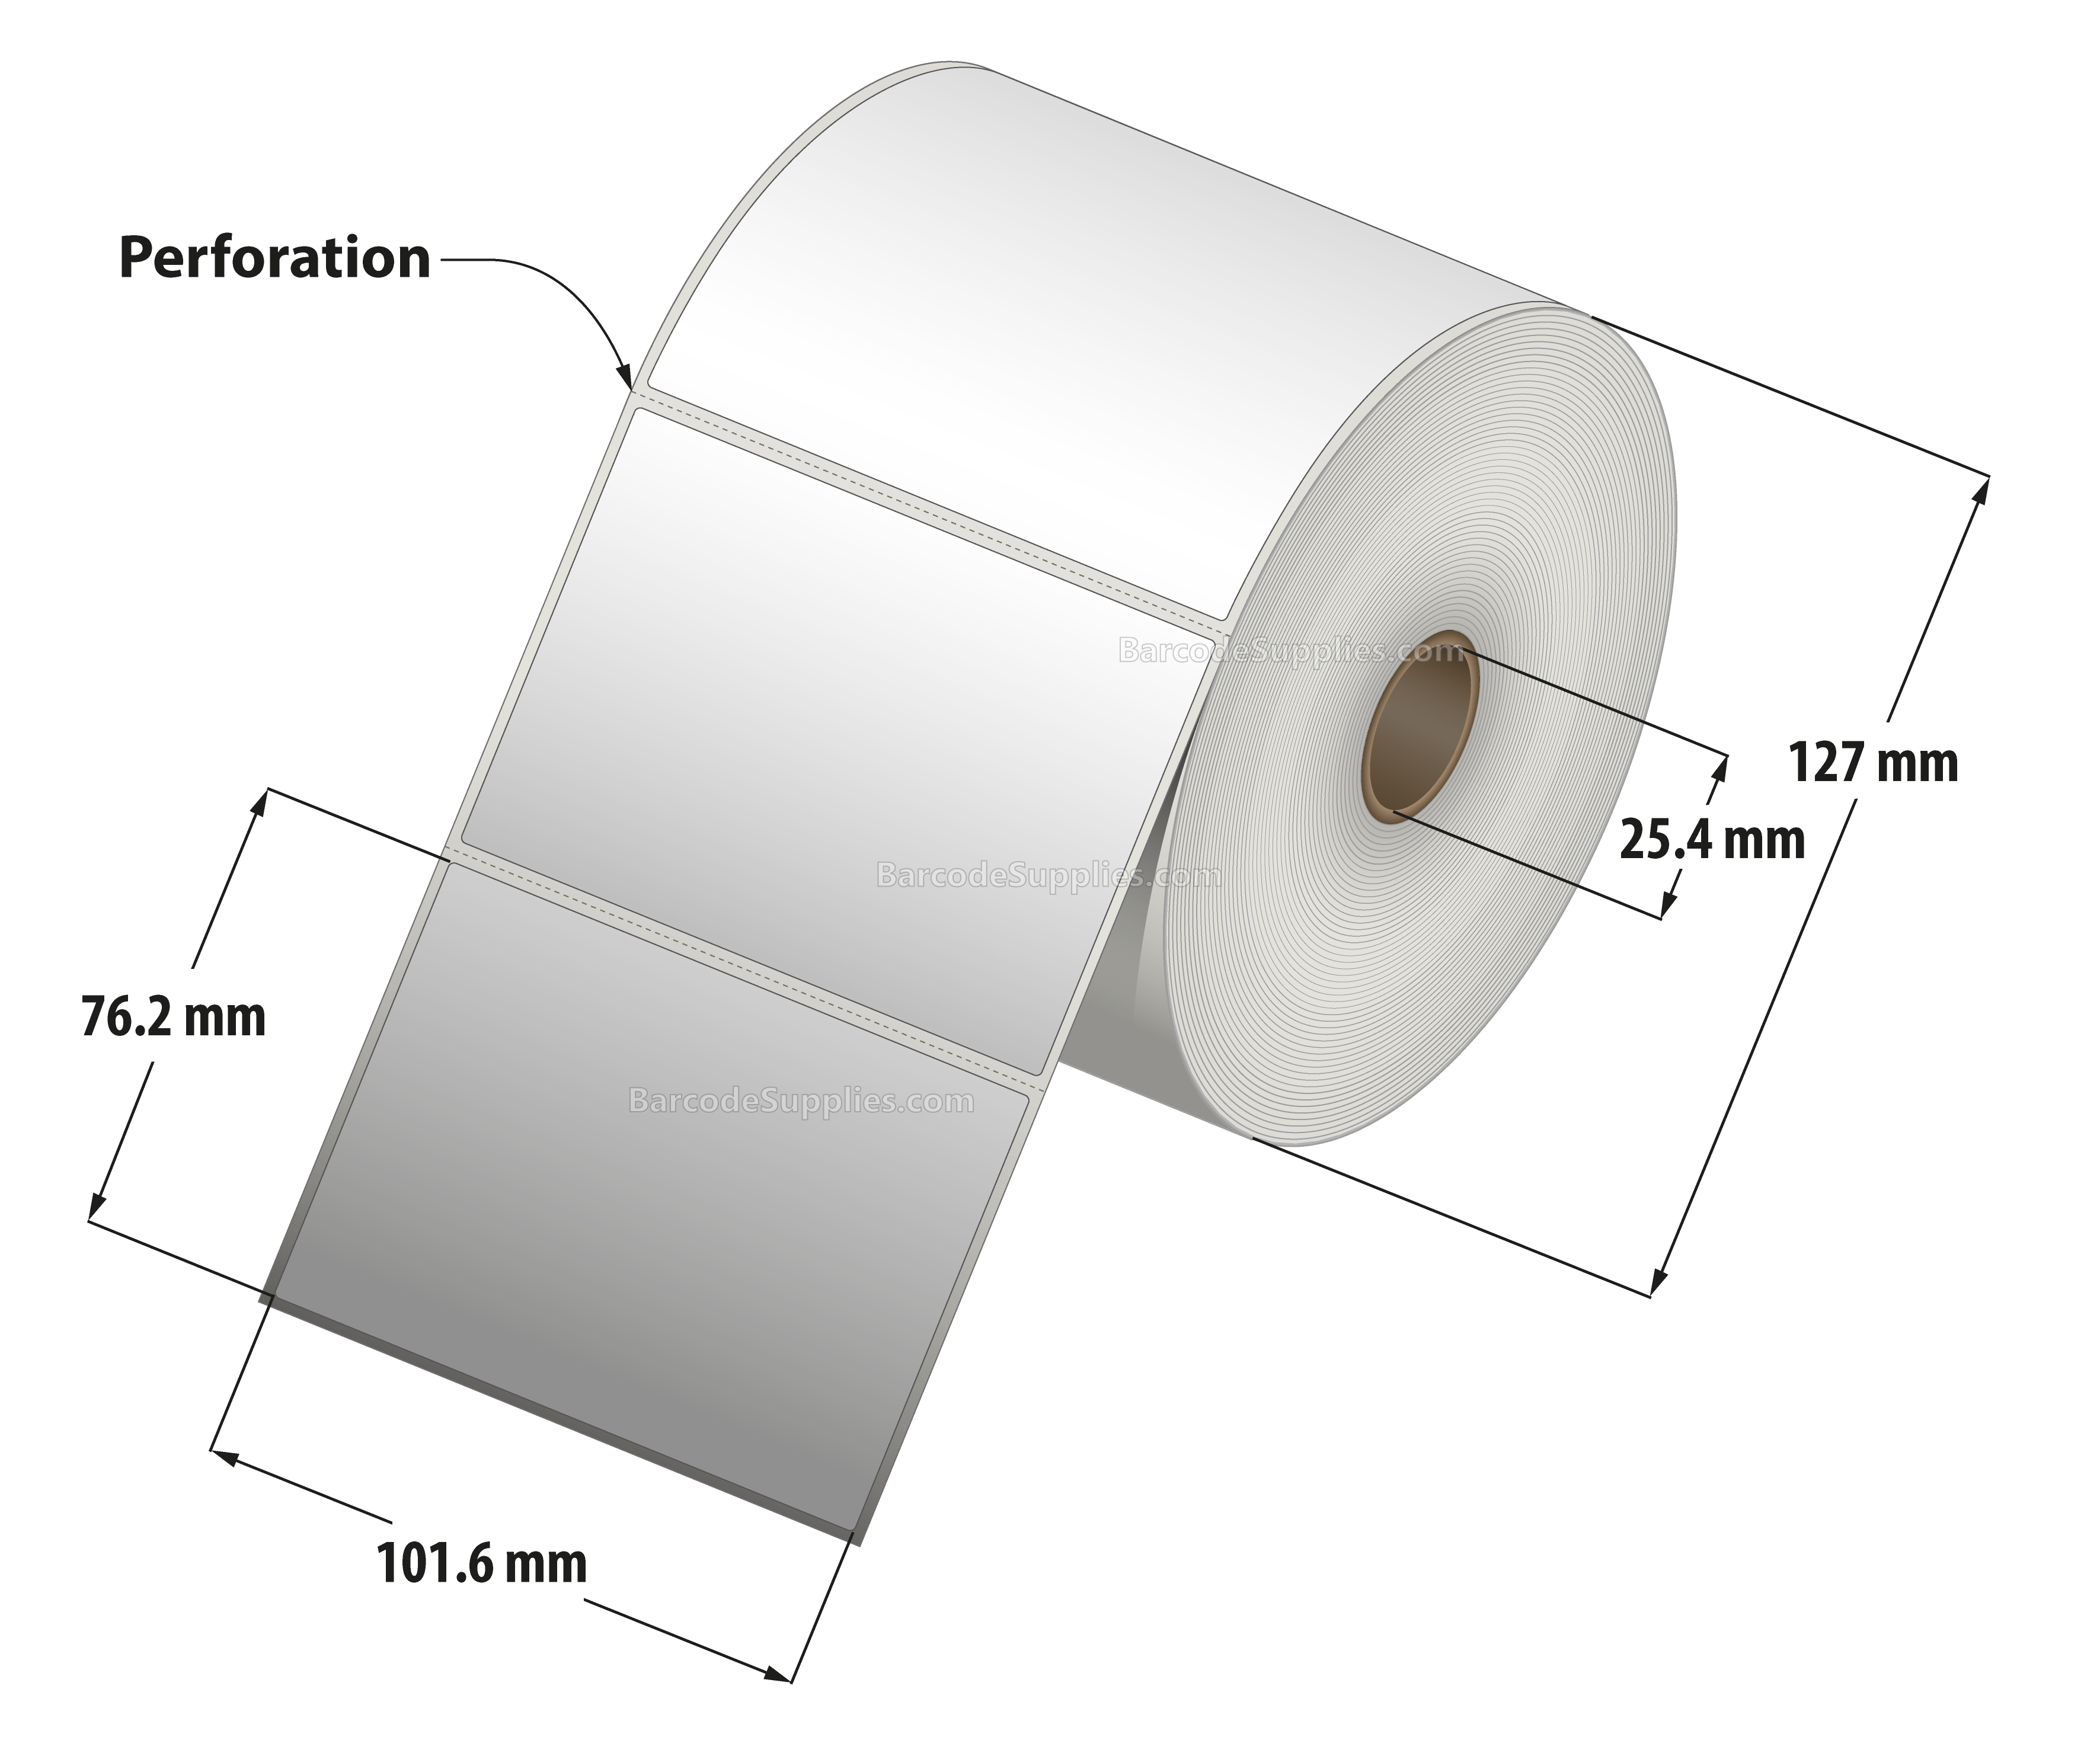 4 x 3 Direct Thermal White Labels With Acrylic Adhesive - Perforated - 890 Labels Per Roll - Carton Of 12 Rolls - 10680 Labels Total - MPN: RD-4-3-890-1 - BarcodeSource, Inc.